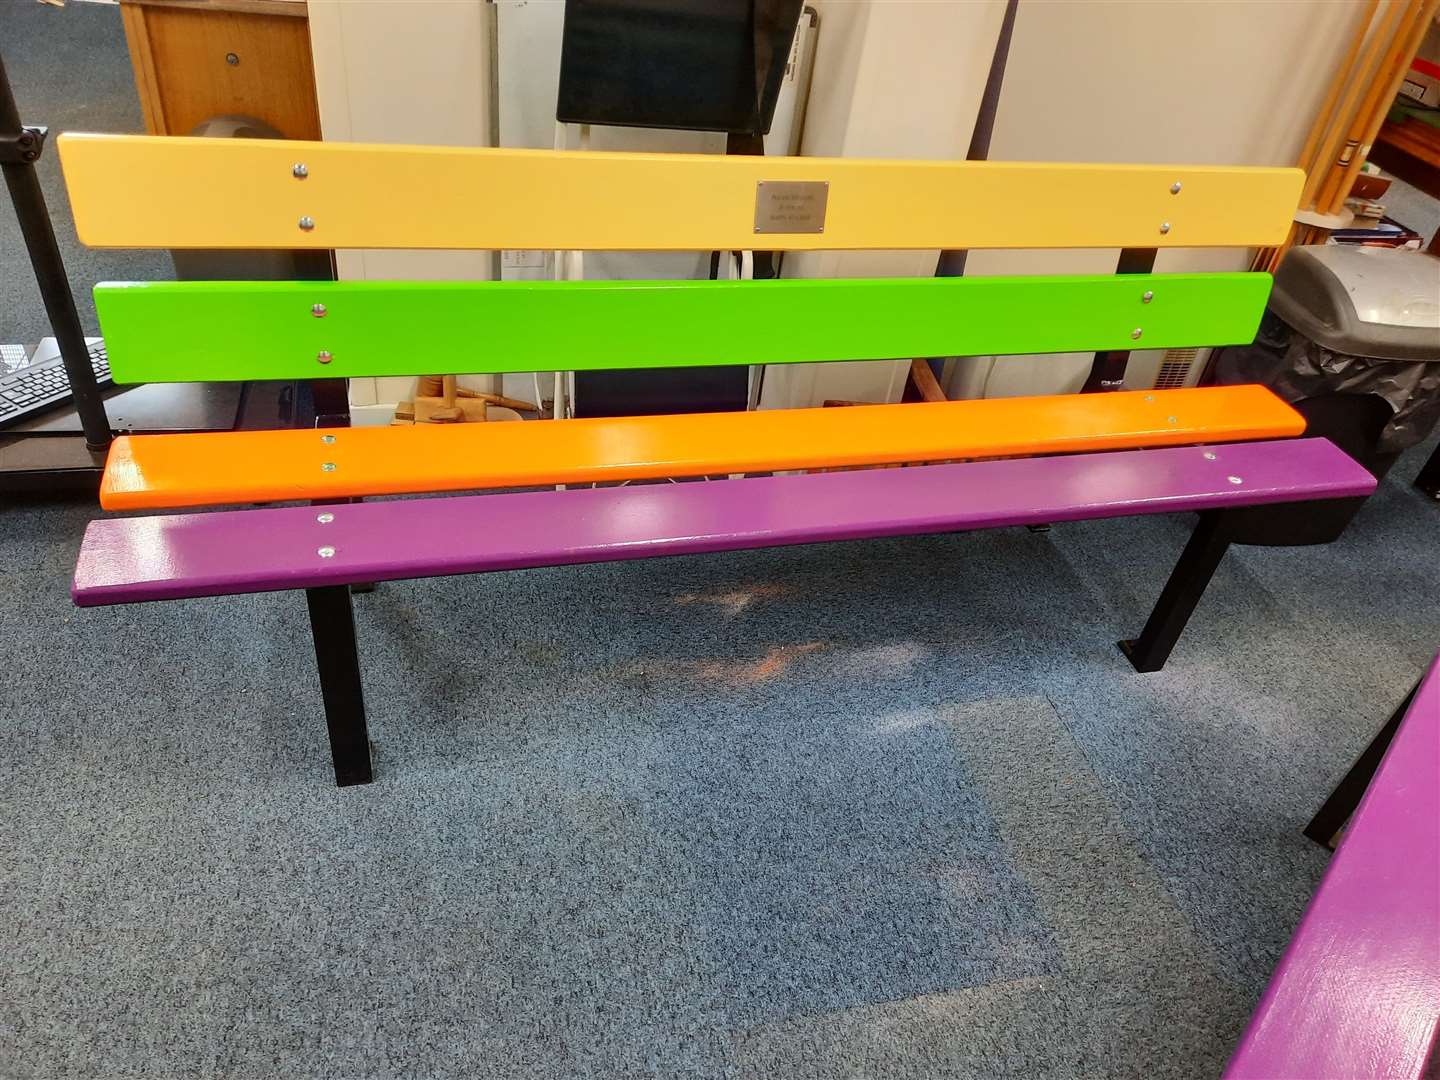 The brightly coloured benches were built and painted at Westhill Men's Shed.